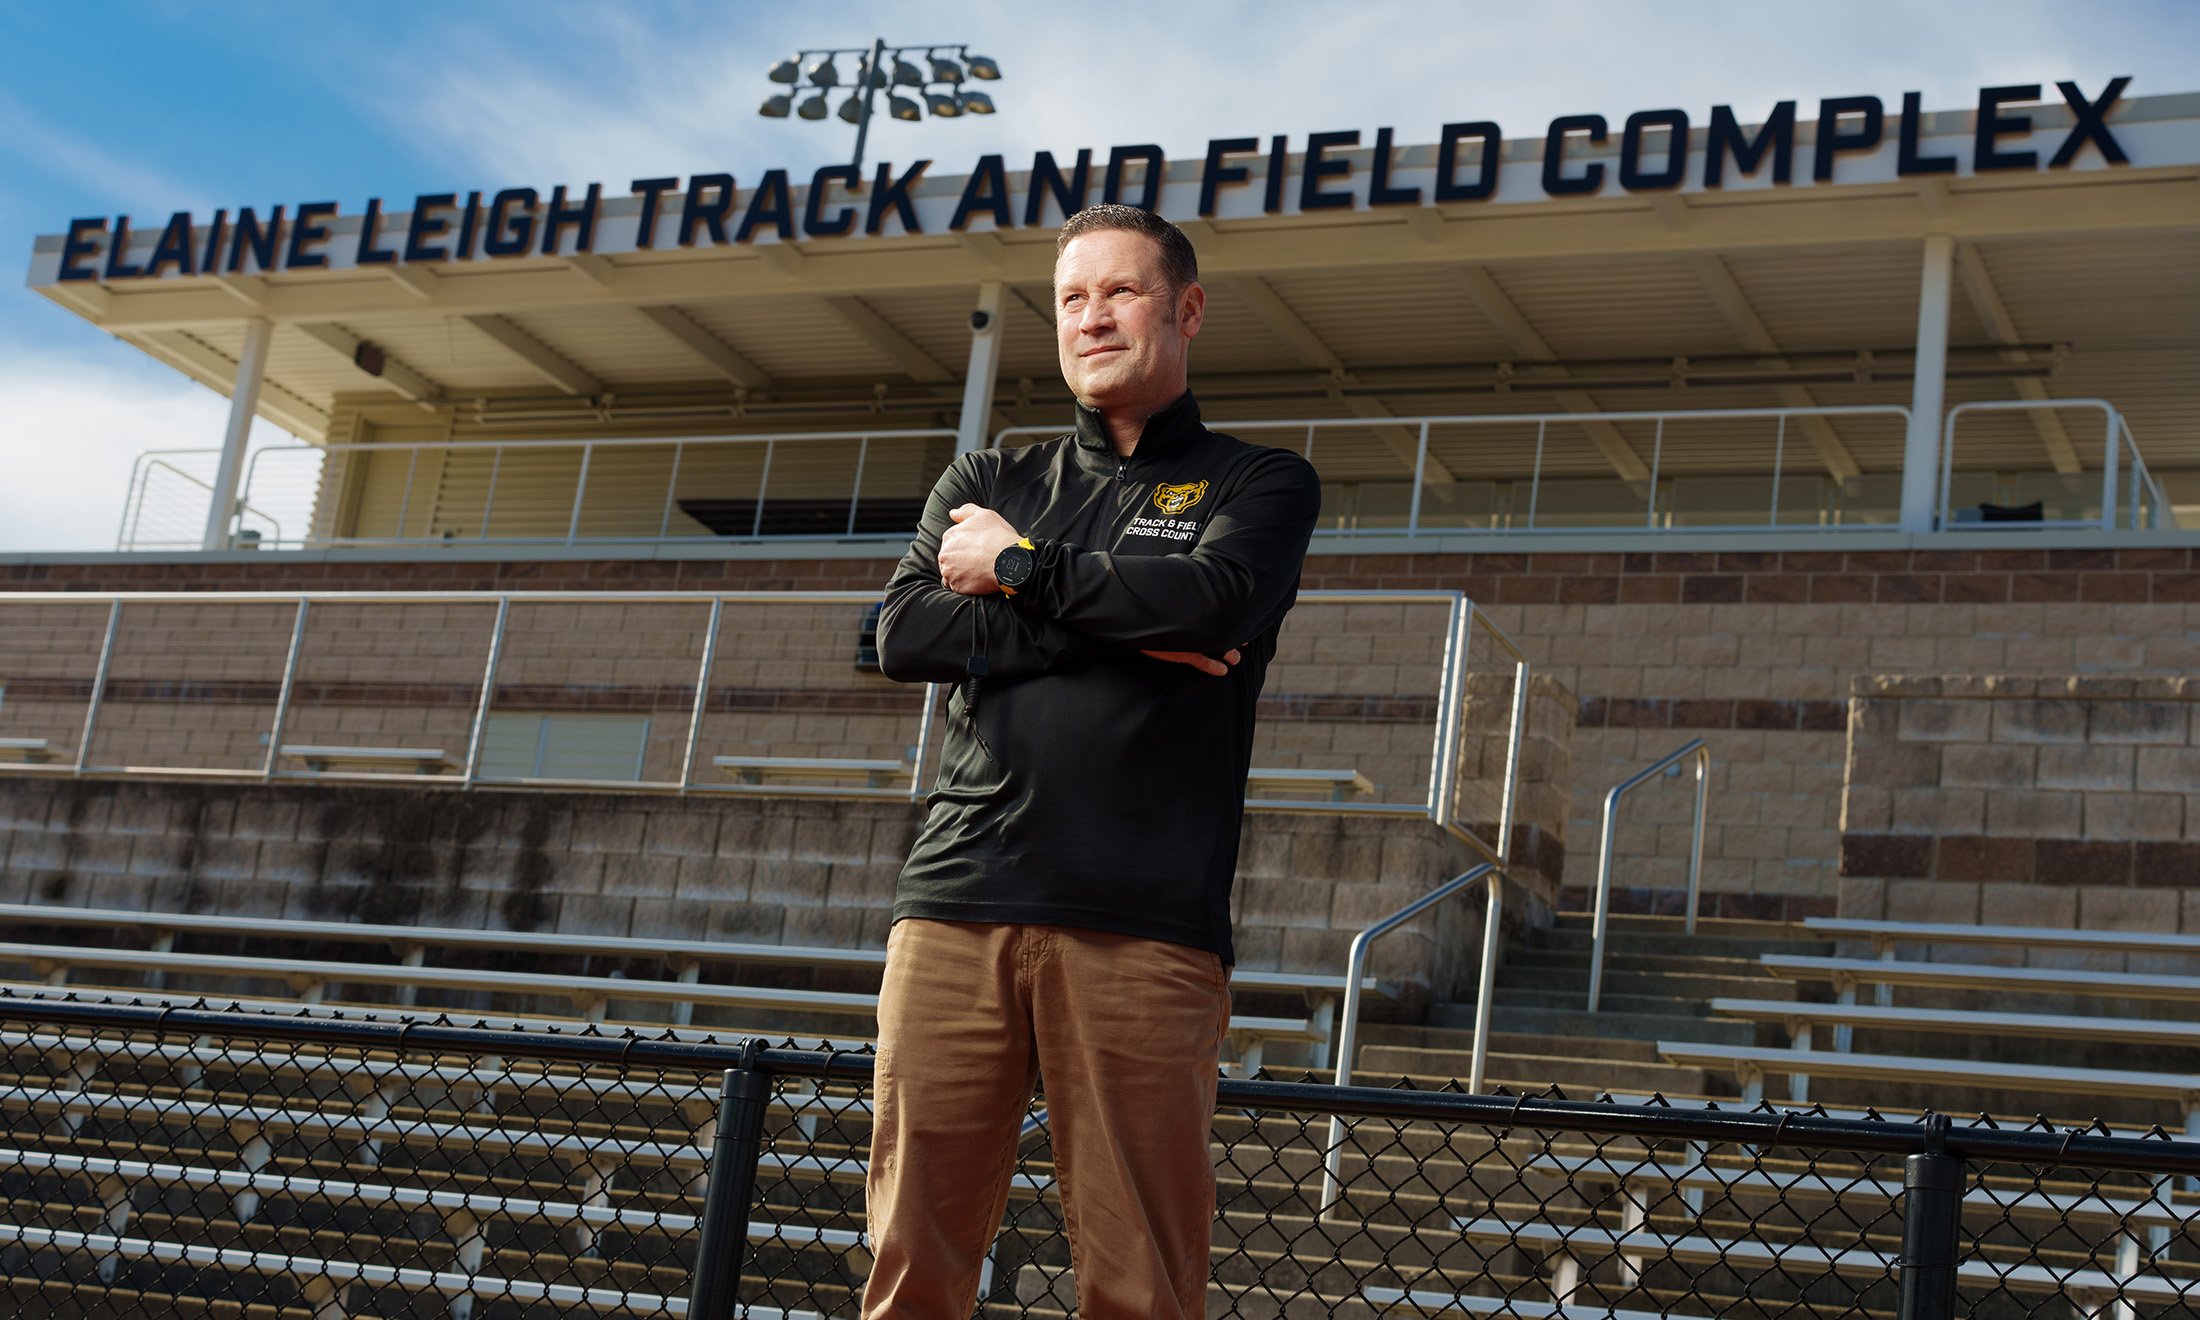 A man standing with the "Elaine Leigh Track and Field Complex" sign behind him